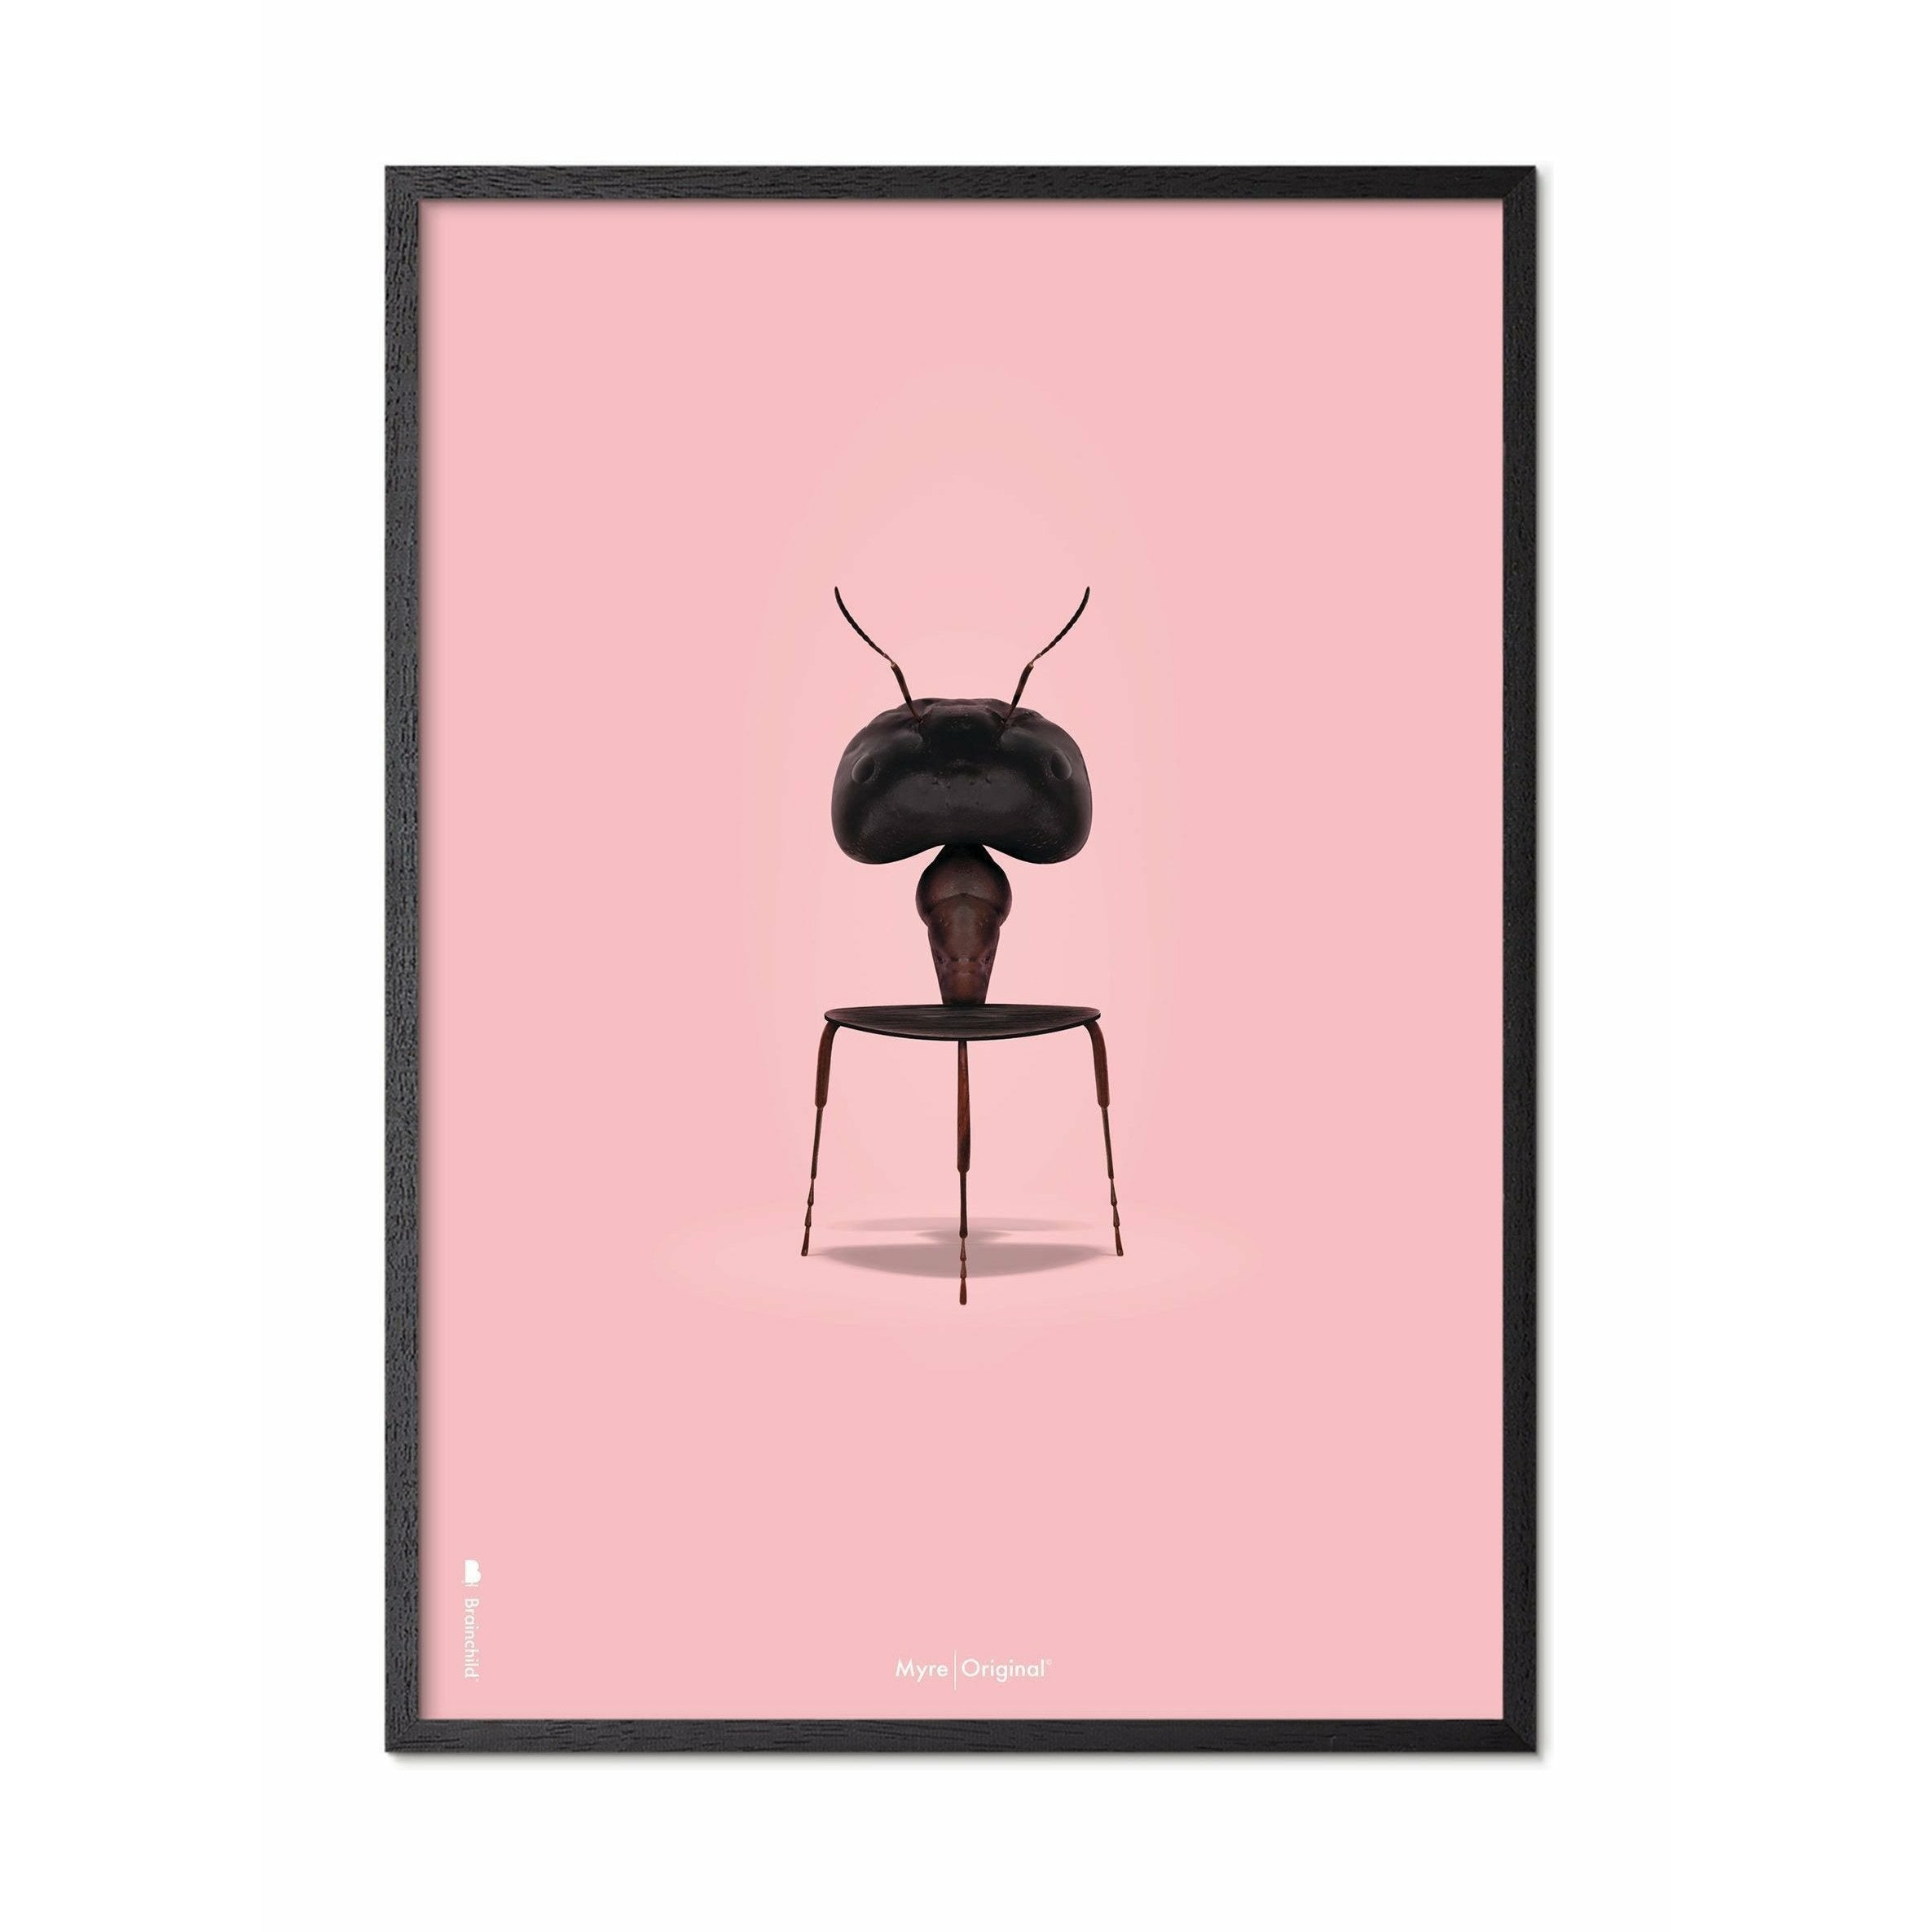 Brainchild Ant Classic Poster, Frame In Black Lacquered Wood 70x100 Cm, Pink Background